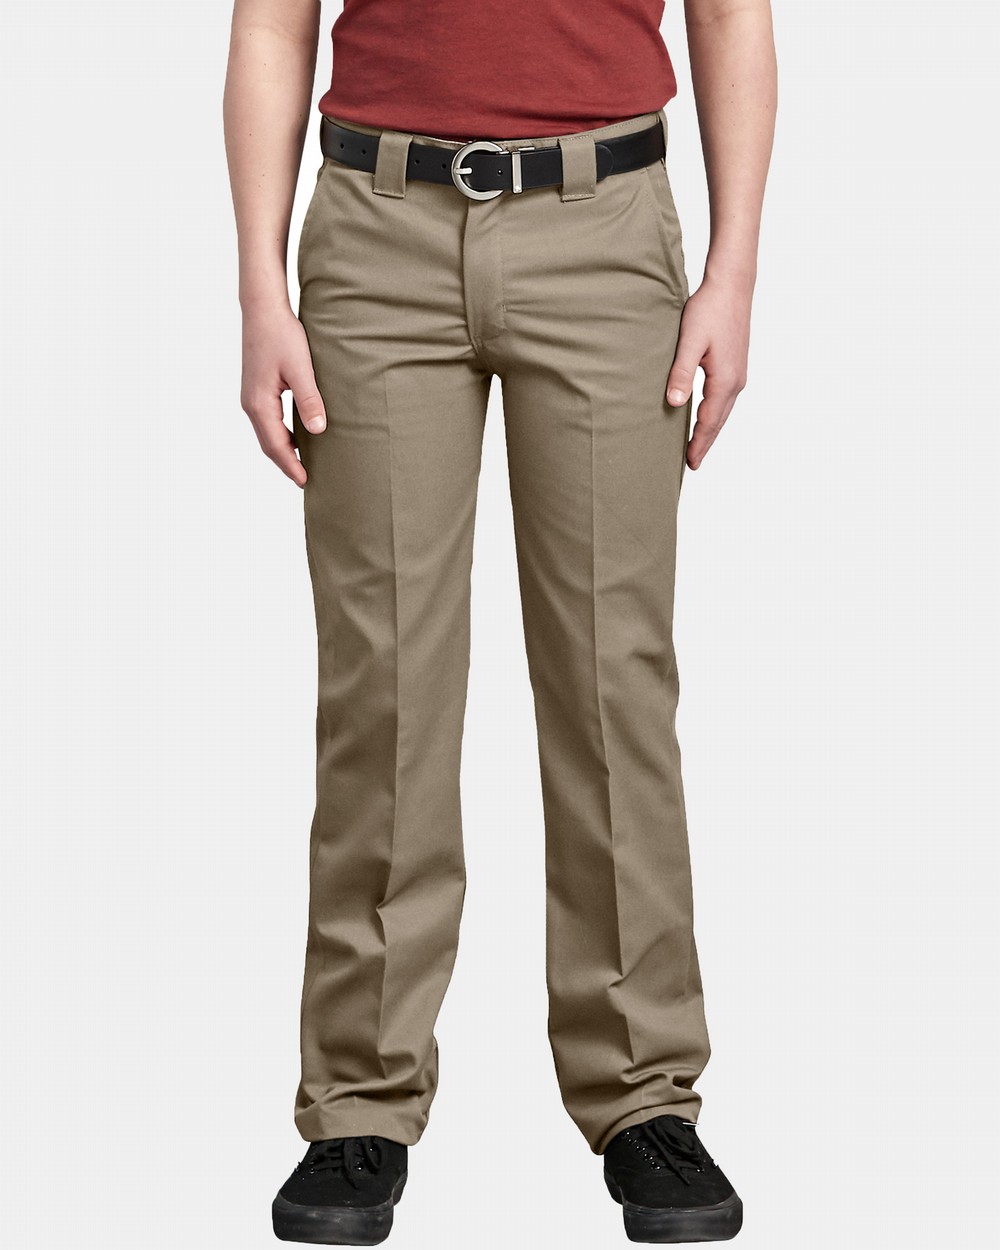 Buy GAS Solid Cotton Slim Fit Boys Trousers  Shoppers Stop